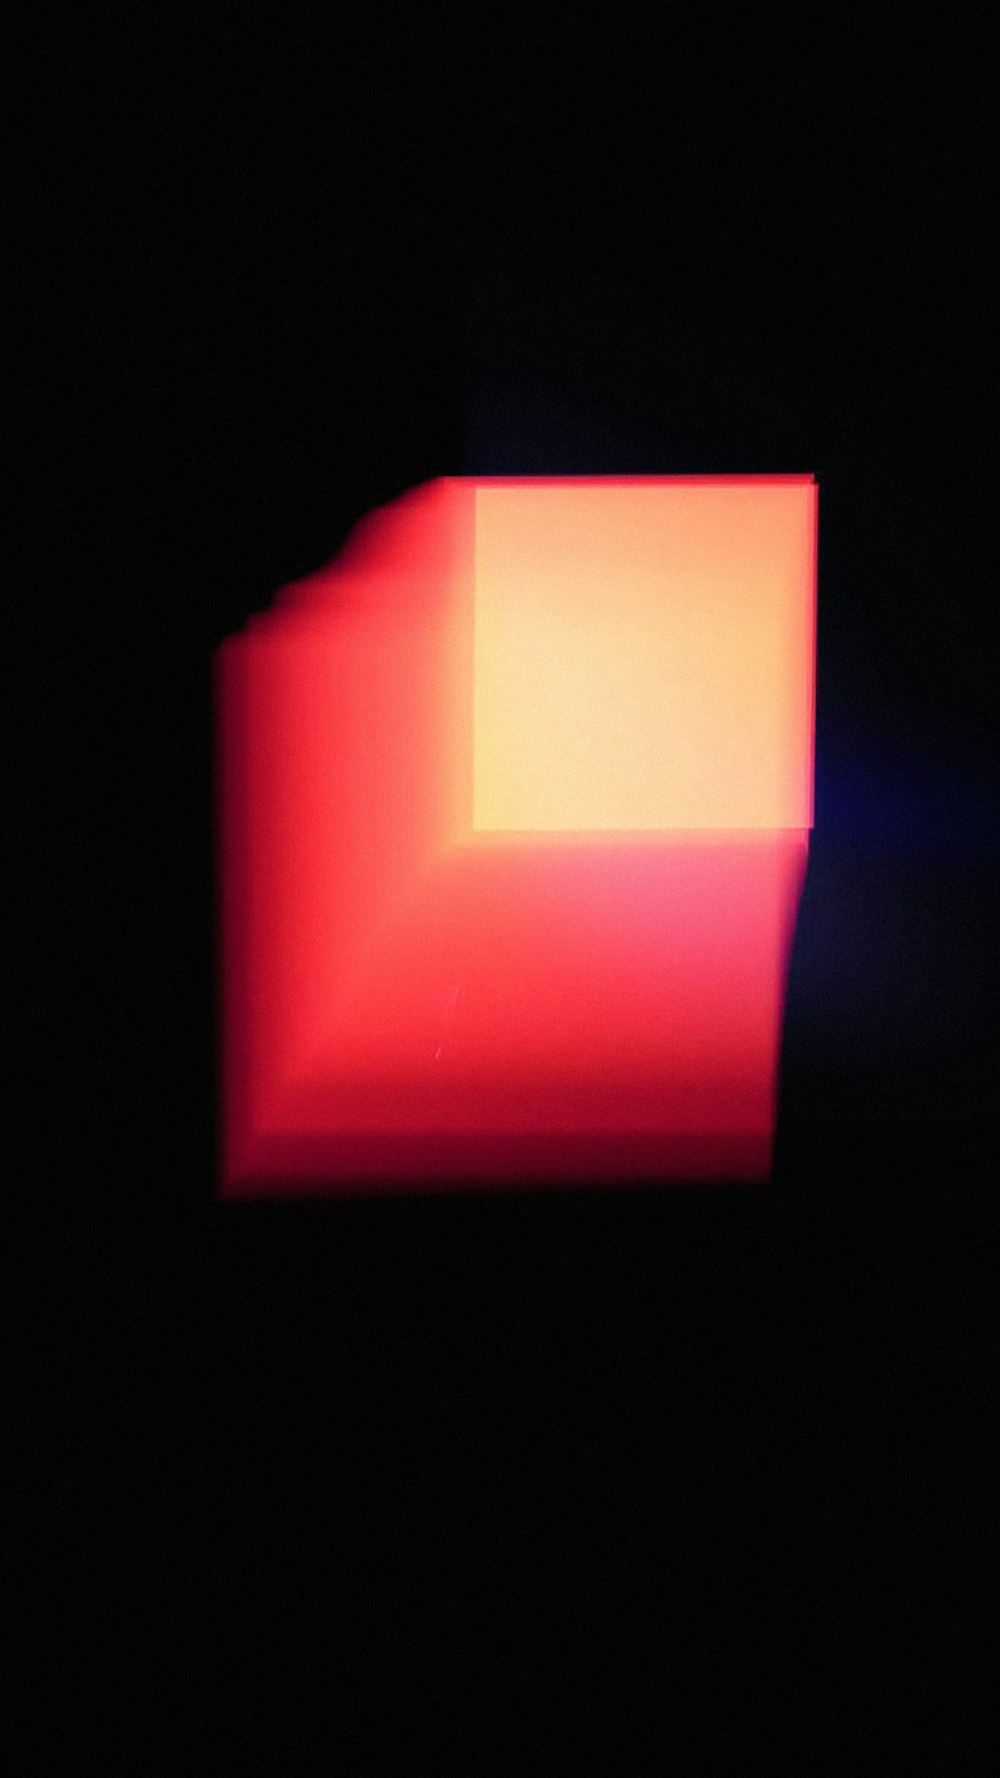 red and yellow square shape light